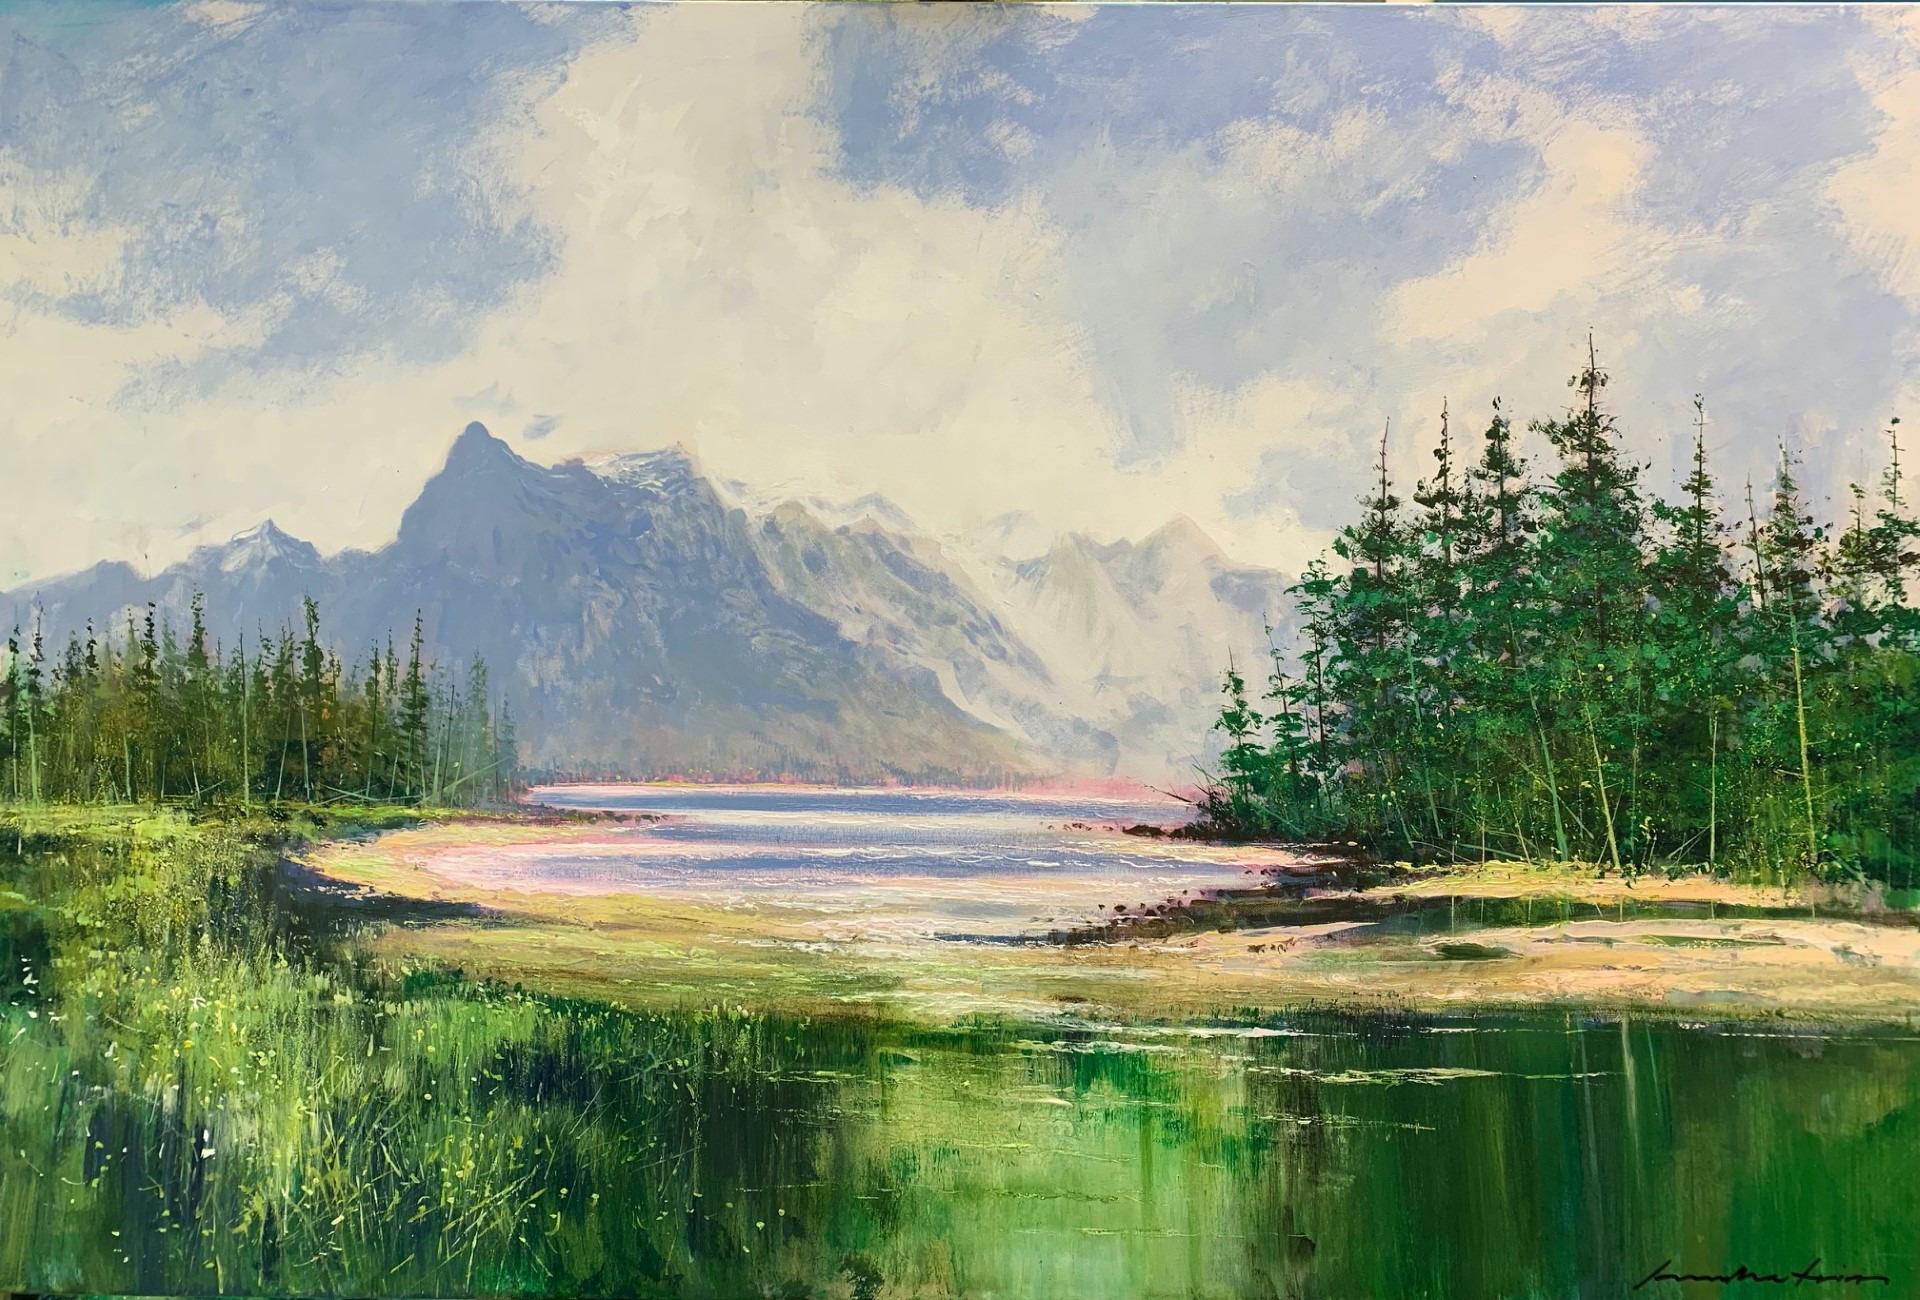 Fraser River Candian Rockies - original impressionism seascape - art for sale - Painting by Jonathan Trim